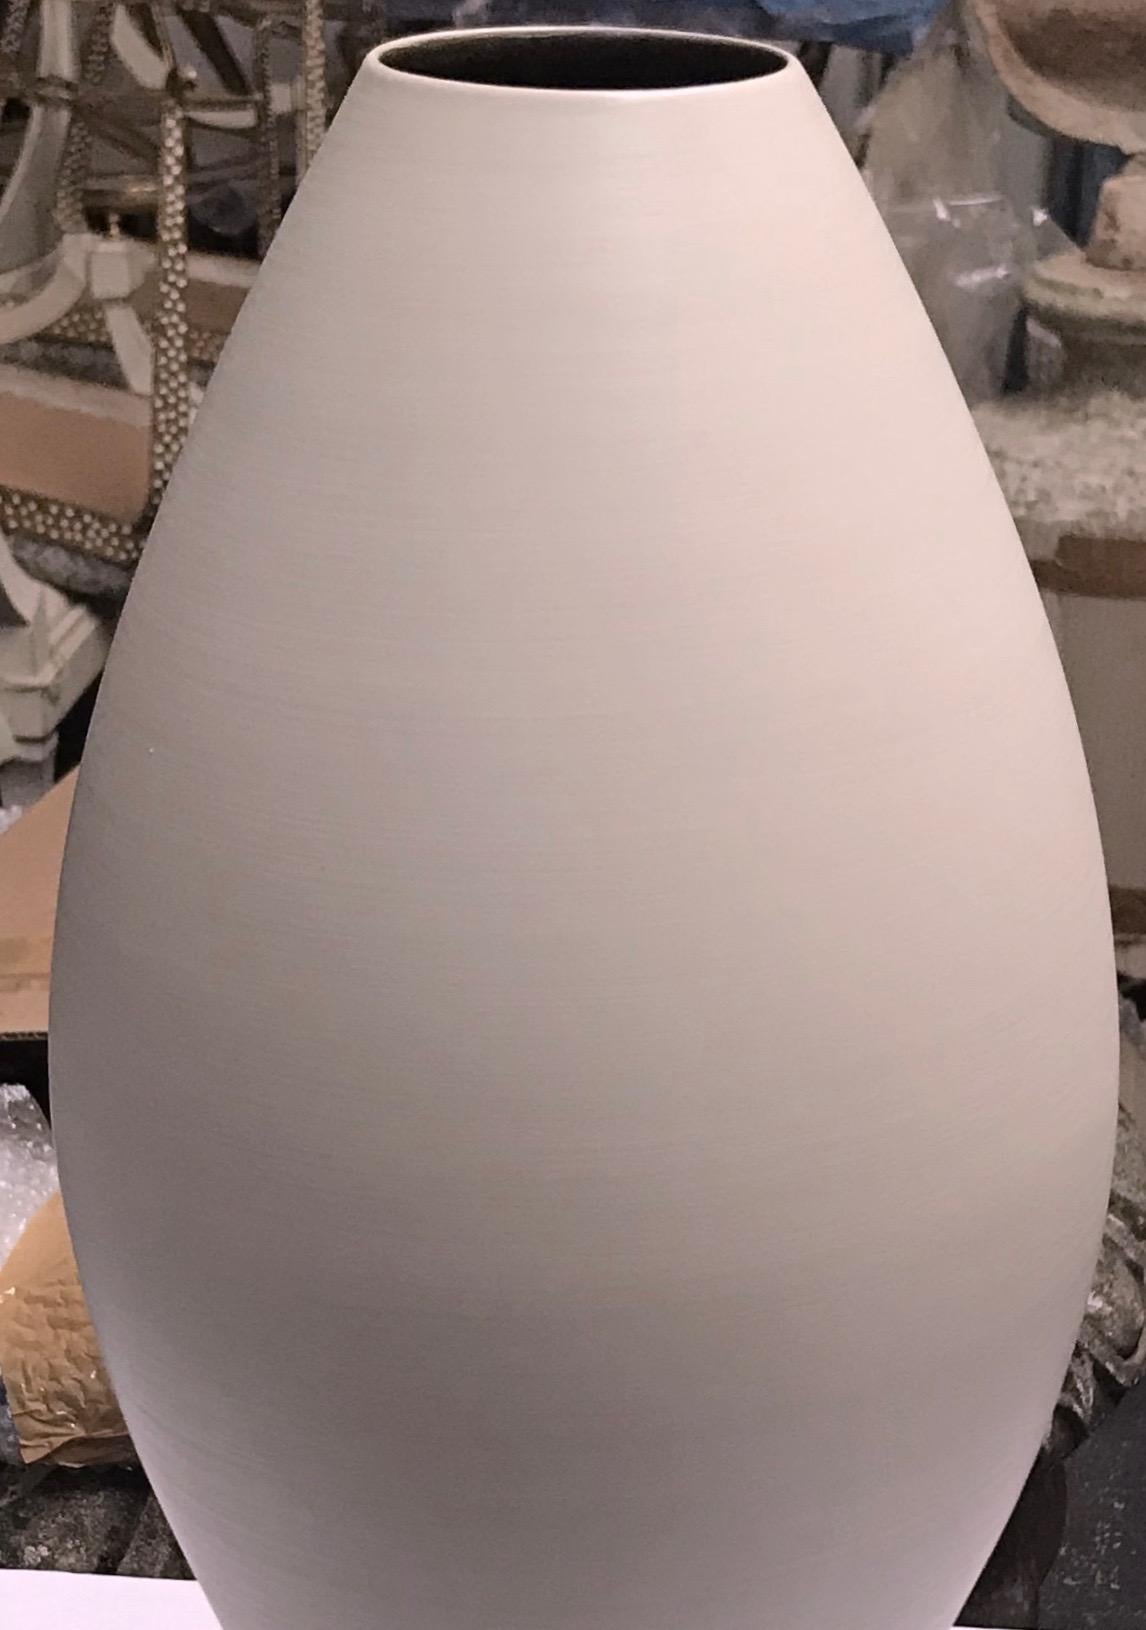 Contemporary Italian large curved shape vase
No neck
Handmade.
Matte finish / fine ceramic.
The same shape is available in linen extra large, S5060, see images #3 and #4.